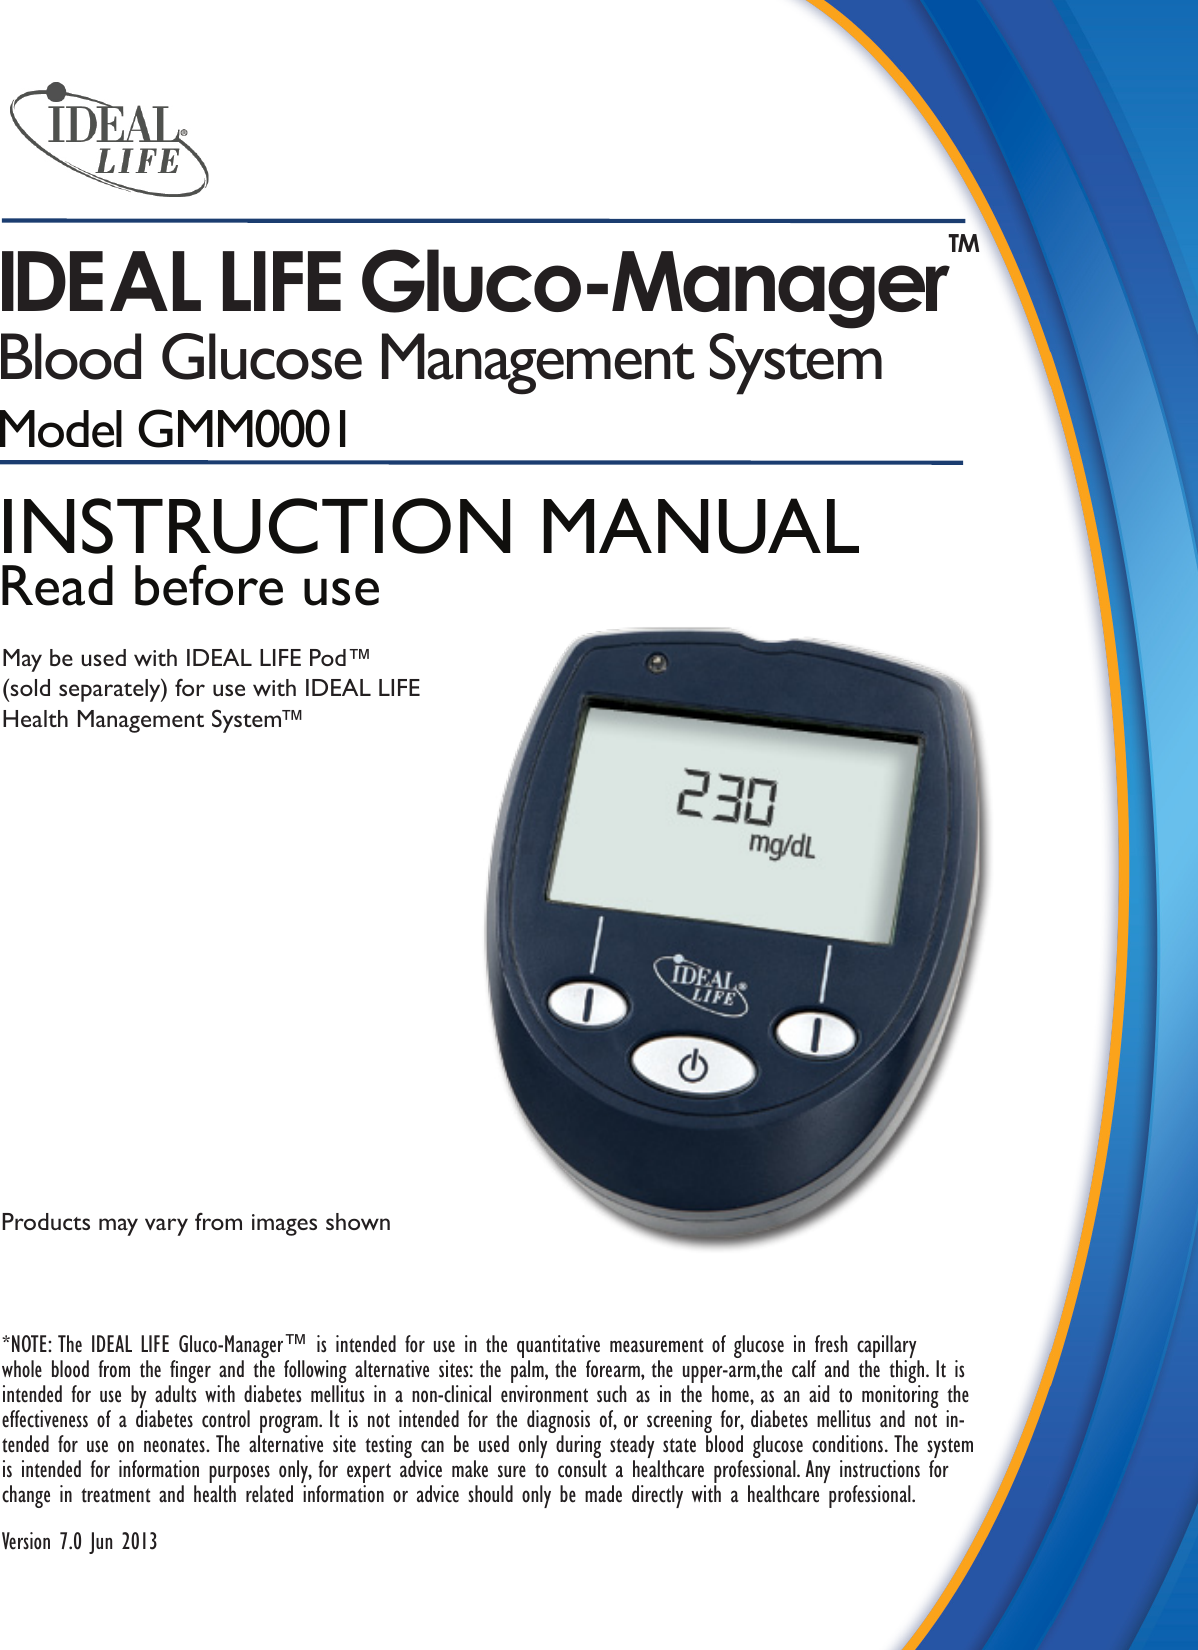 IDEAL LIFE Gluco-Manager TMBlood Glucose Management SystemModel GMM00010001Products may vary from images shown*NOTE: The IDEAL LIFE Gluco-Manager™ is intended for use in the quantitative measurement of glucose in fresh capillary whole blood from the nger and the following alternative sites: the palm, the forearm, the upper-arm,the calf and the thigh. It is intended for use by adults with diabetes mellitus in a non-clinical environment such as in the home, as an aid to monitoring the effectiveness of a diabetes control program. It is not intended for the diagnosis of, or screening for, diabetes mellitus and not in-tended for use on neonates. The alternative site testing can be used only during steady state blood glucose conditions. The system is intended for information purposes only, for expert advice make sure to consult a healthcare professional. Any instructions for change in treatment and health related information or advice should only be made directly with a healthcare professional.Version 7.0 Jun 2013INSTRUCTION MANUALRead before useMay be used with IDEAL LIFE Pod™(sold separately) for use with IDEAL LIFE Health Management System™